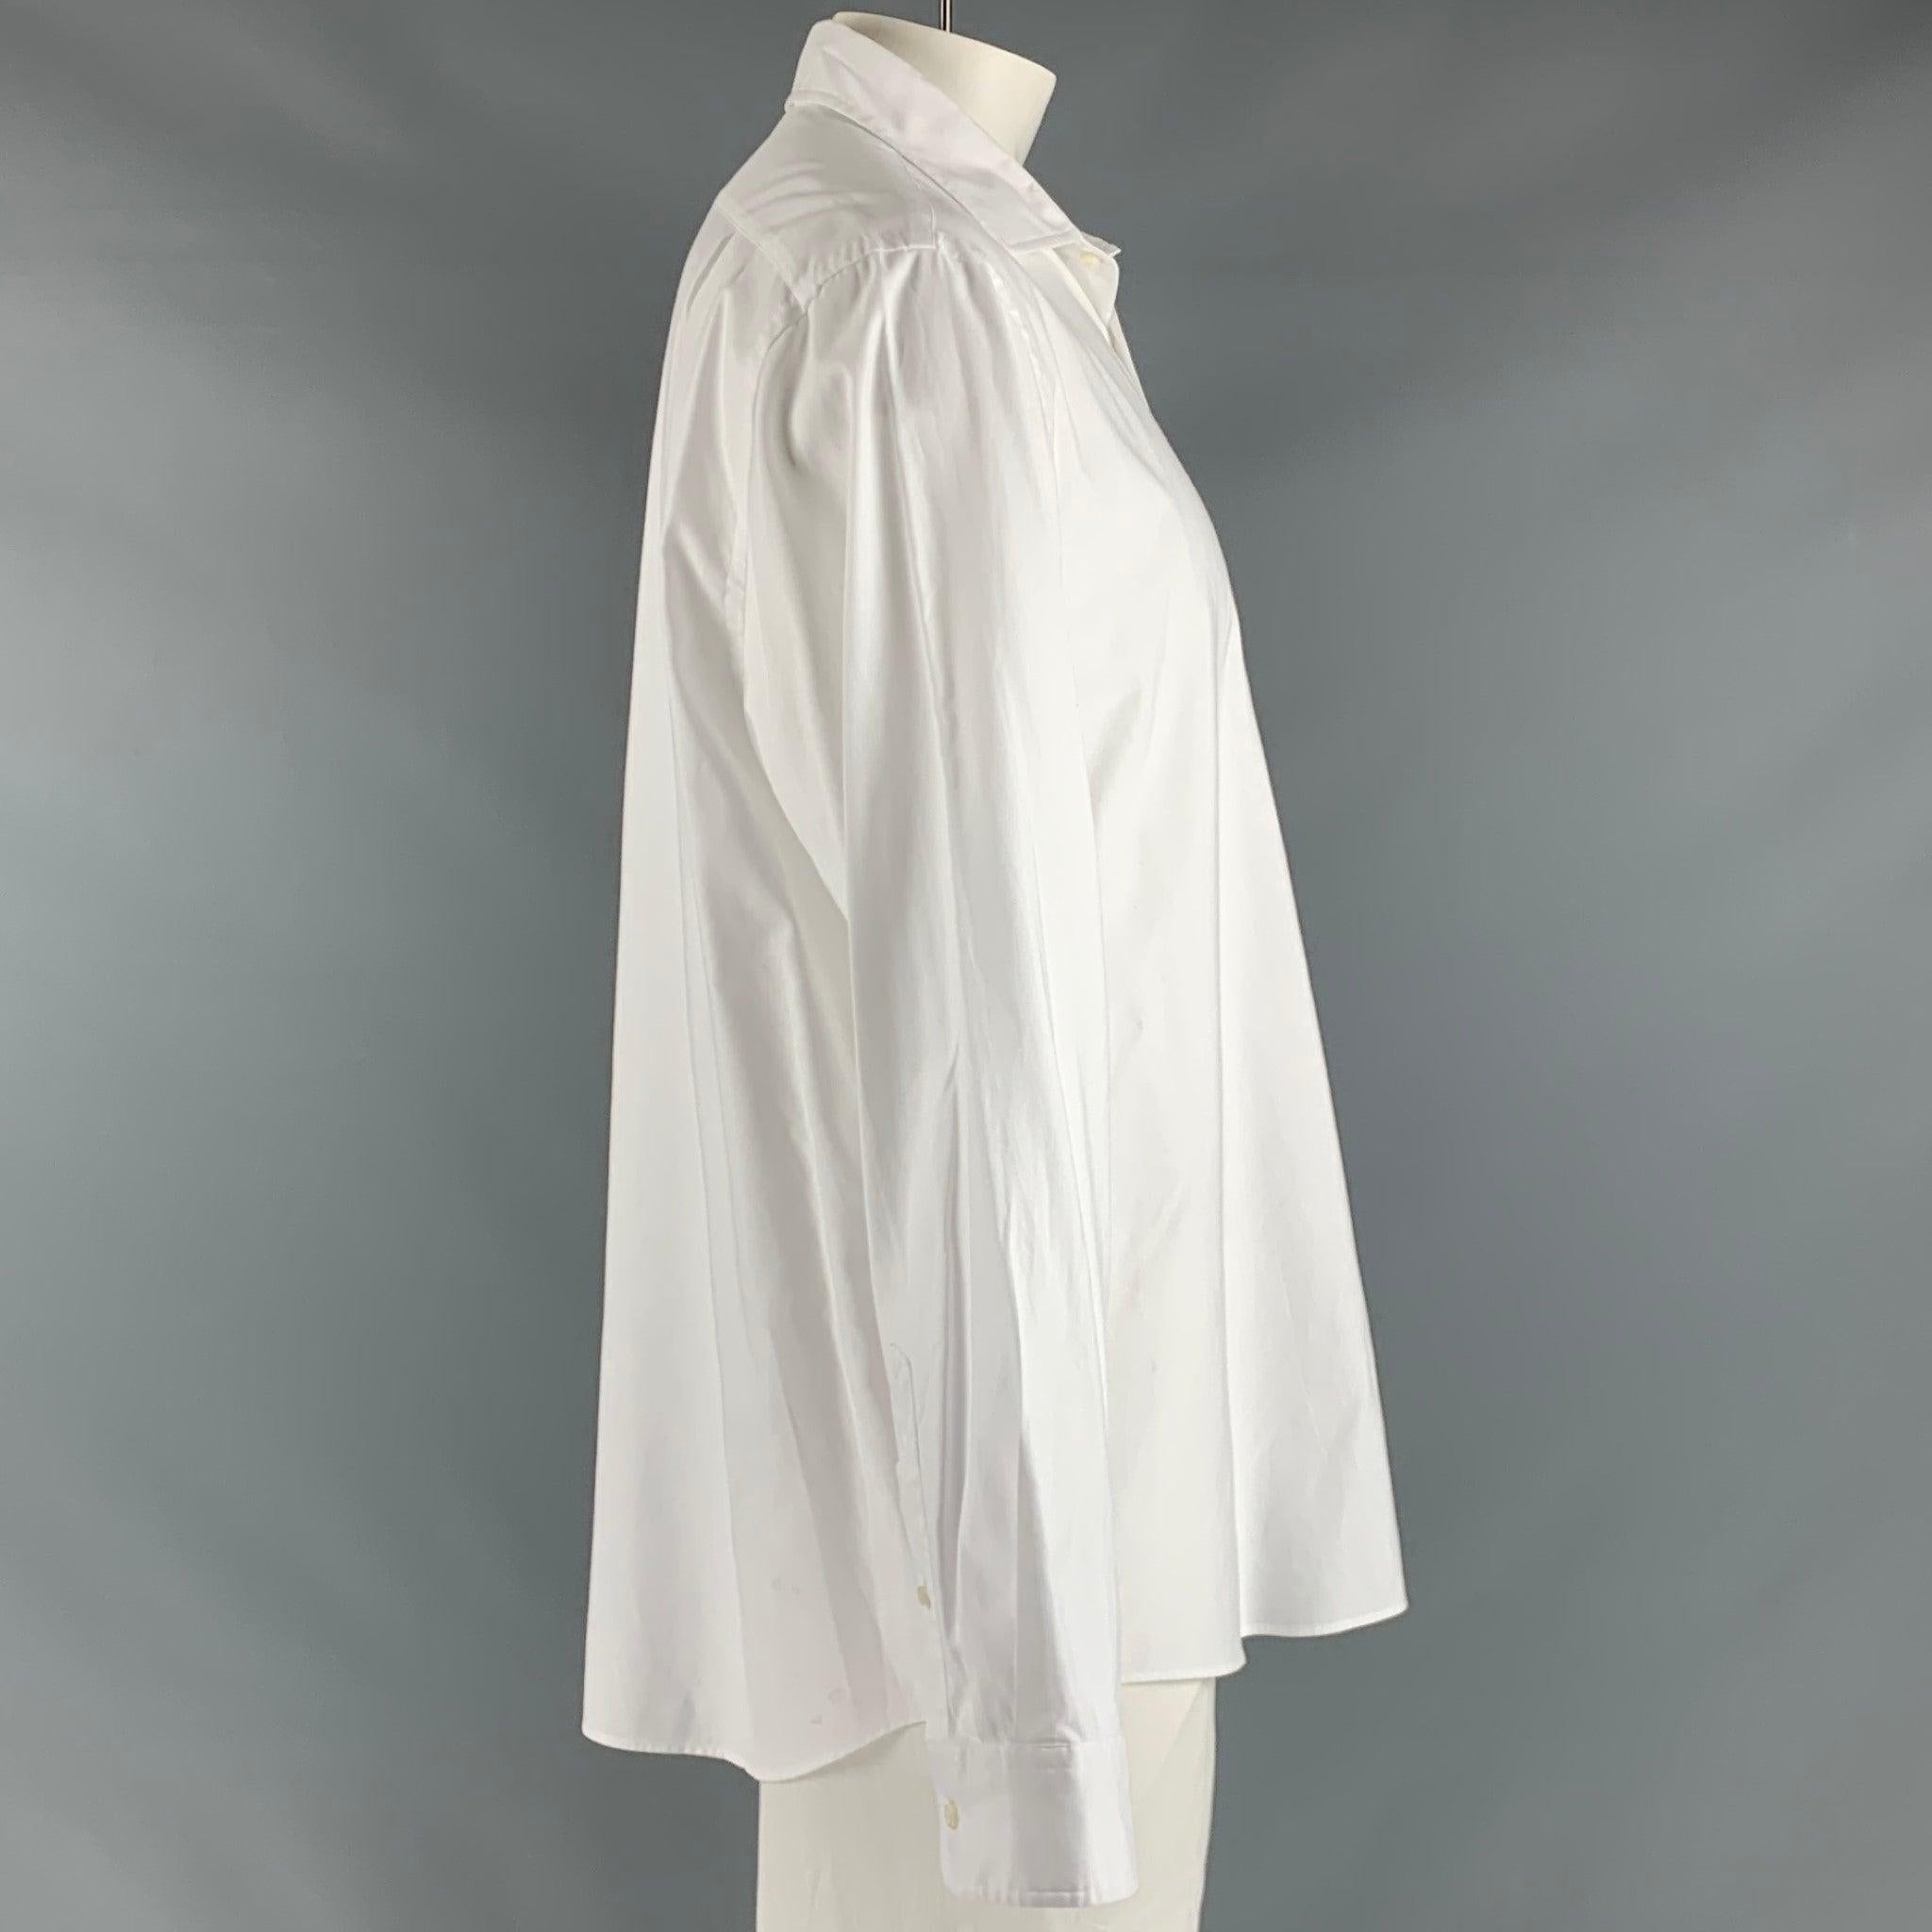 RALPH LAUREN PURPLE LABEL long sleeve shirt
in a white cotton fabric featuring a spread collar and button closure.Good Pre-Owned Condition. Minor marks throughout. 

Marked:   18 

Measurements: 
 
Shoulder: 19 inches  Chest: 51 inches  Sleeve: 28